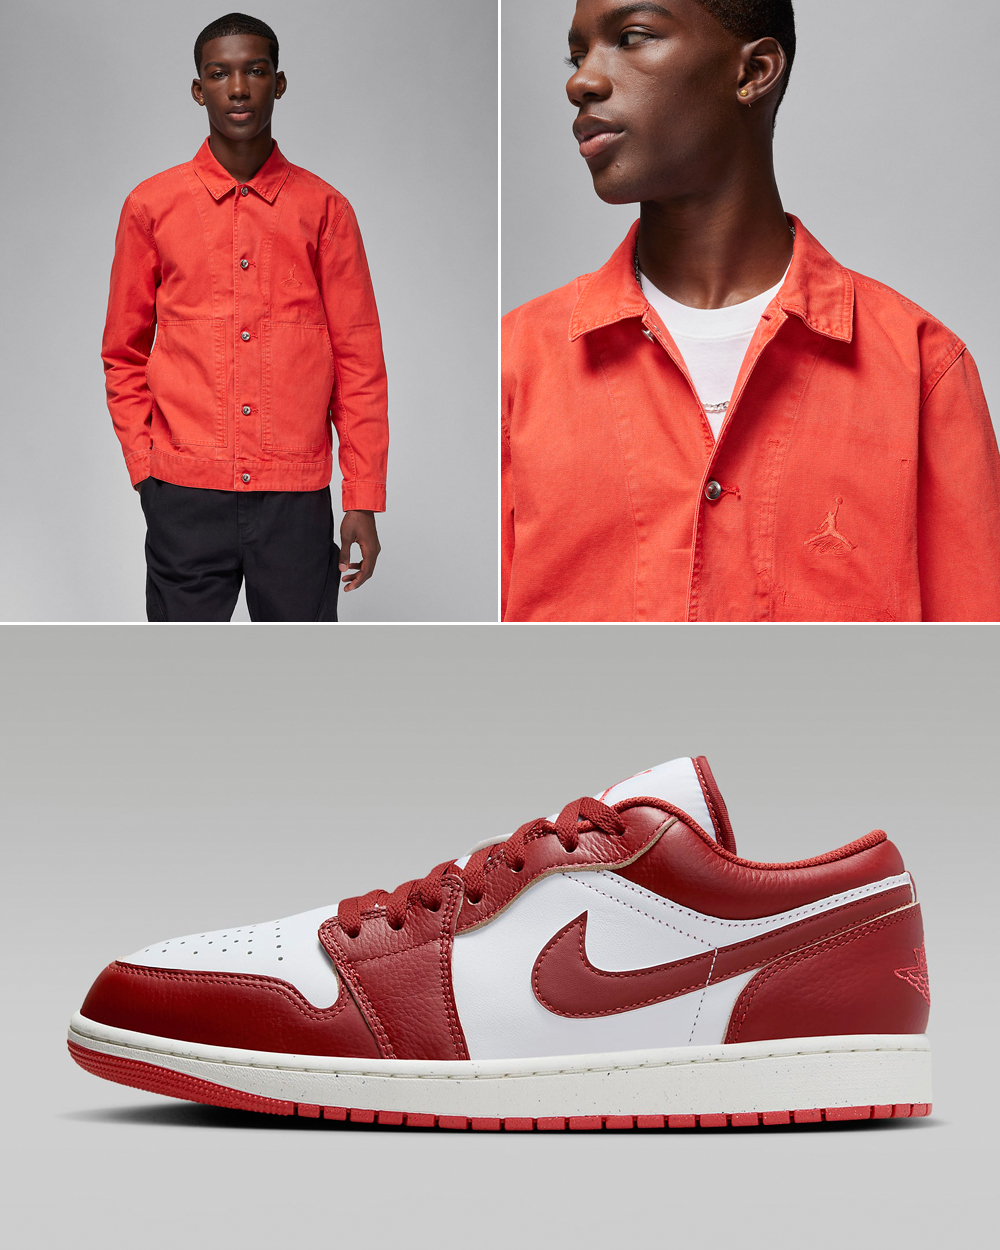 Air-Jordan-1-Low-SE-White-Lobster-Dune-Red-Jacket-Outfit